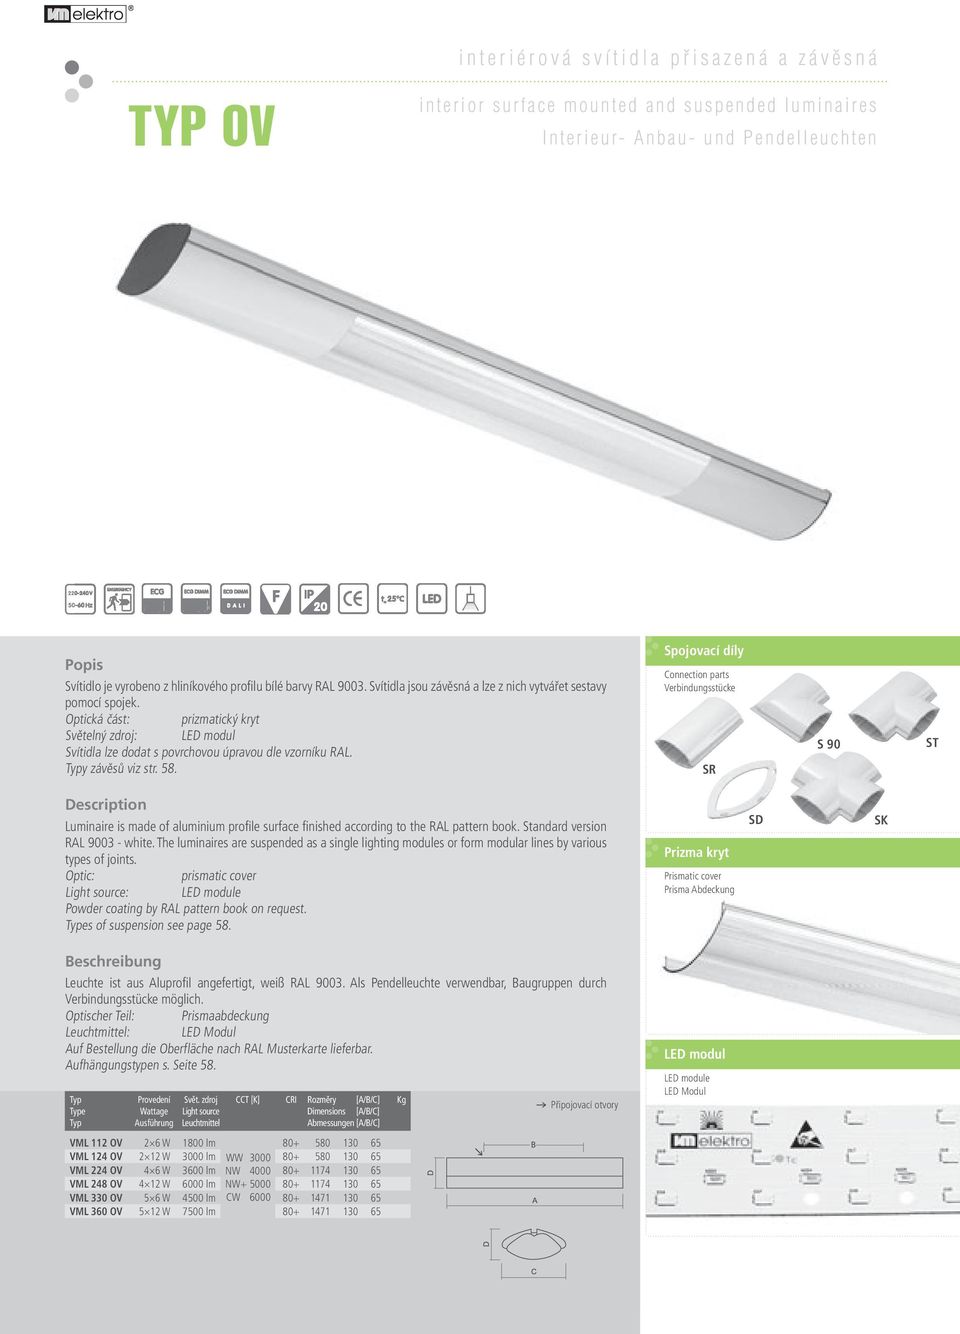 58. Spojovací díly Connection parts Verbindungsstücke SR S 90 ST Luminaire is made of aluminium profile surface finished according to the RAL pattern book. Standard version RAL 9003 - white.